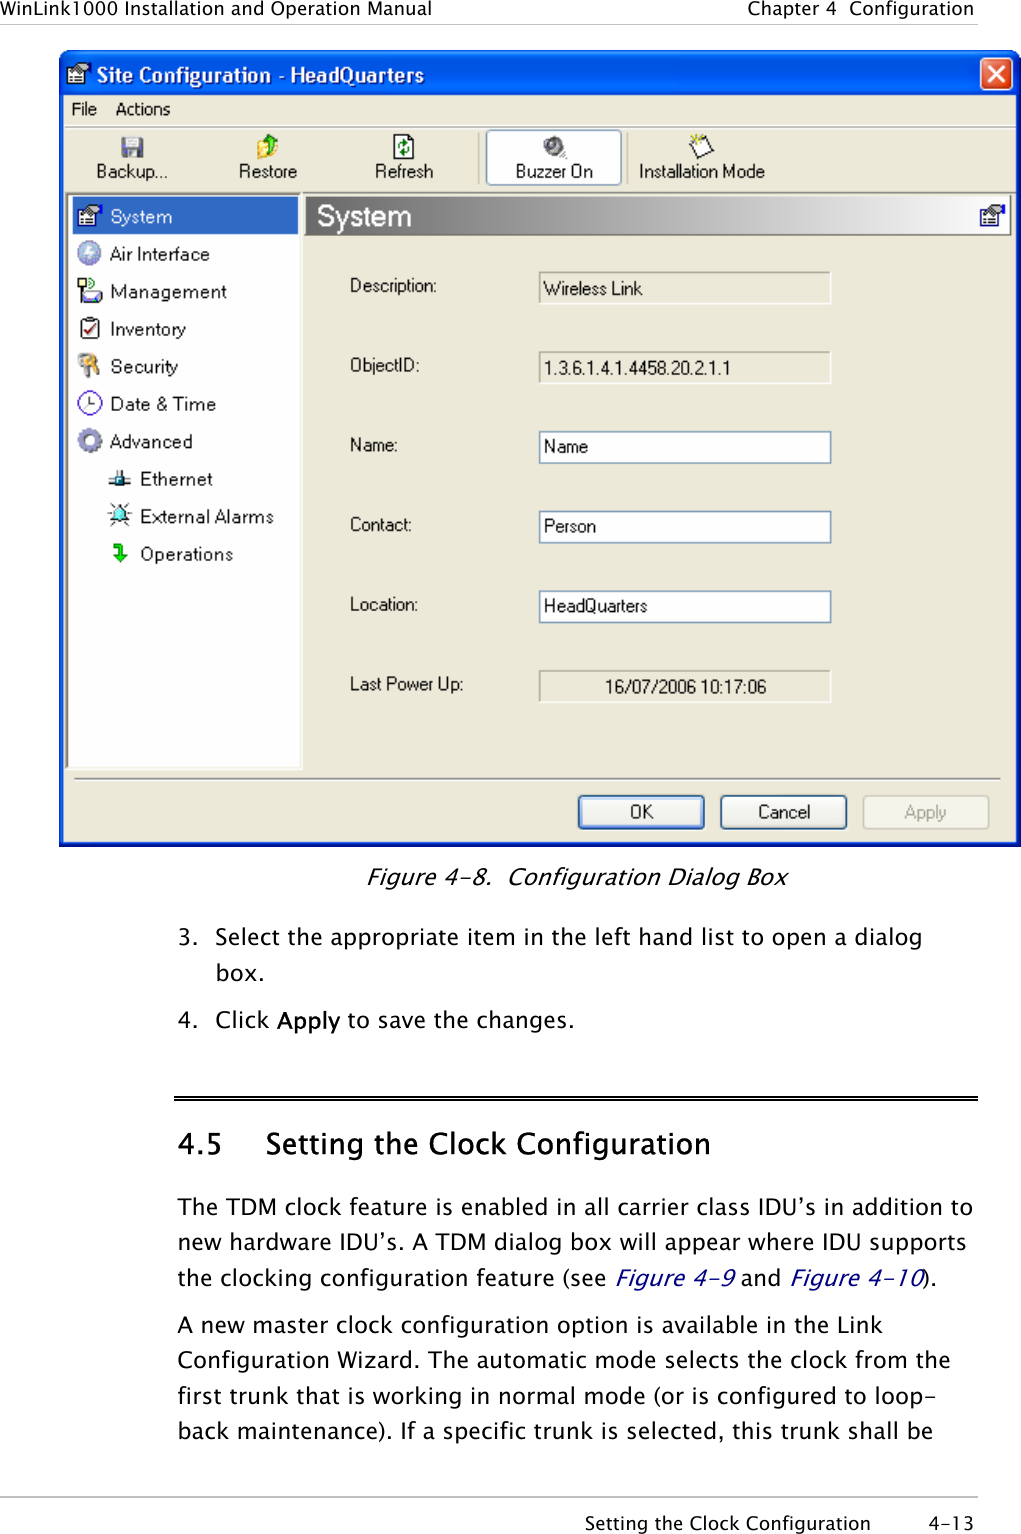 WinLink1000 Installation and Operation Manual  Chapter  4  Configuration  Figure  4-8.  Configuration Dialog Box 3. Select the appropriate item in the left hand list to open a dialog box. 4. Click Apply to save the changes. 4.5 Setting the Clock Configuration The TDM clock feature is enabled in all carrier class IDU’s in addition to new hardware IDU’s. A TDM dialog box will appear where IDU supports the clocking configuration feature (see Figure  4-9 and Figure  4-10). A new master clock configuration option is available in the Link Configuration Wizard. The automatic mode selects the clock from the first trunk that is working in normal mode (or is configured to loop-back maintenance). If a specific trunk is selected, this trunk shall be   Setting the Clock Configuration  4-13 